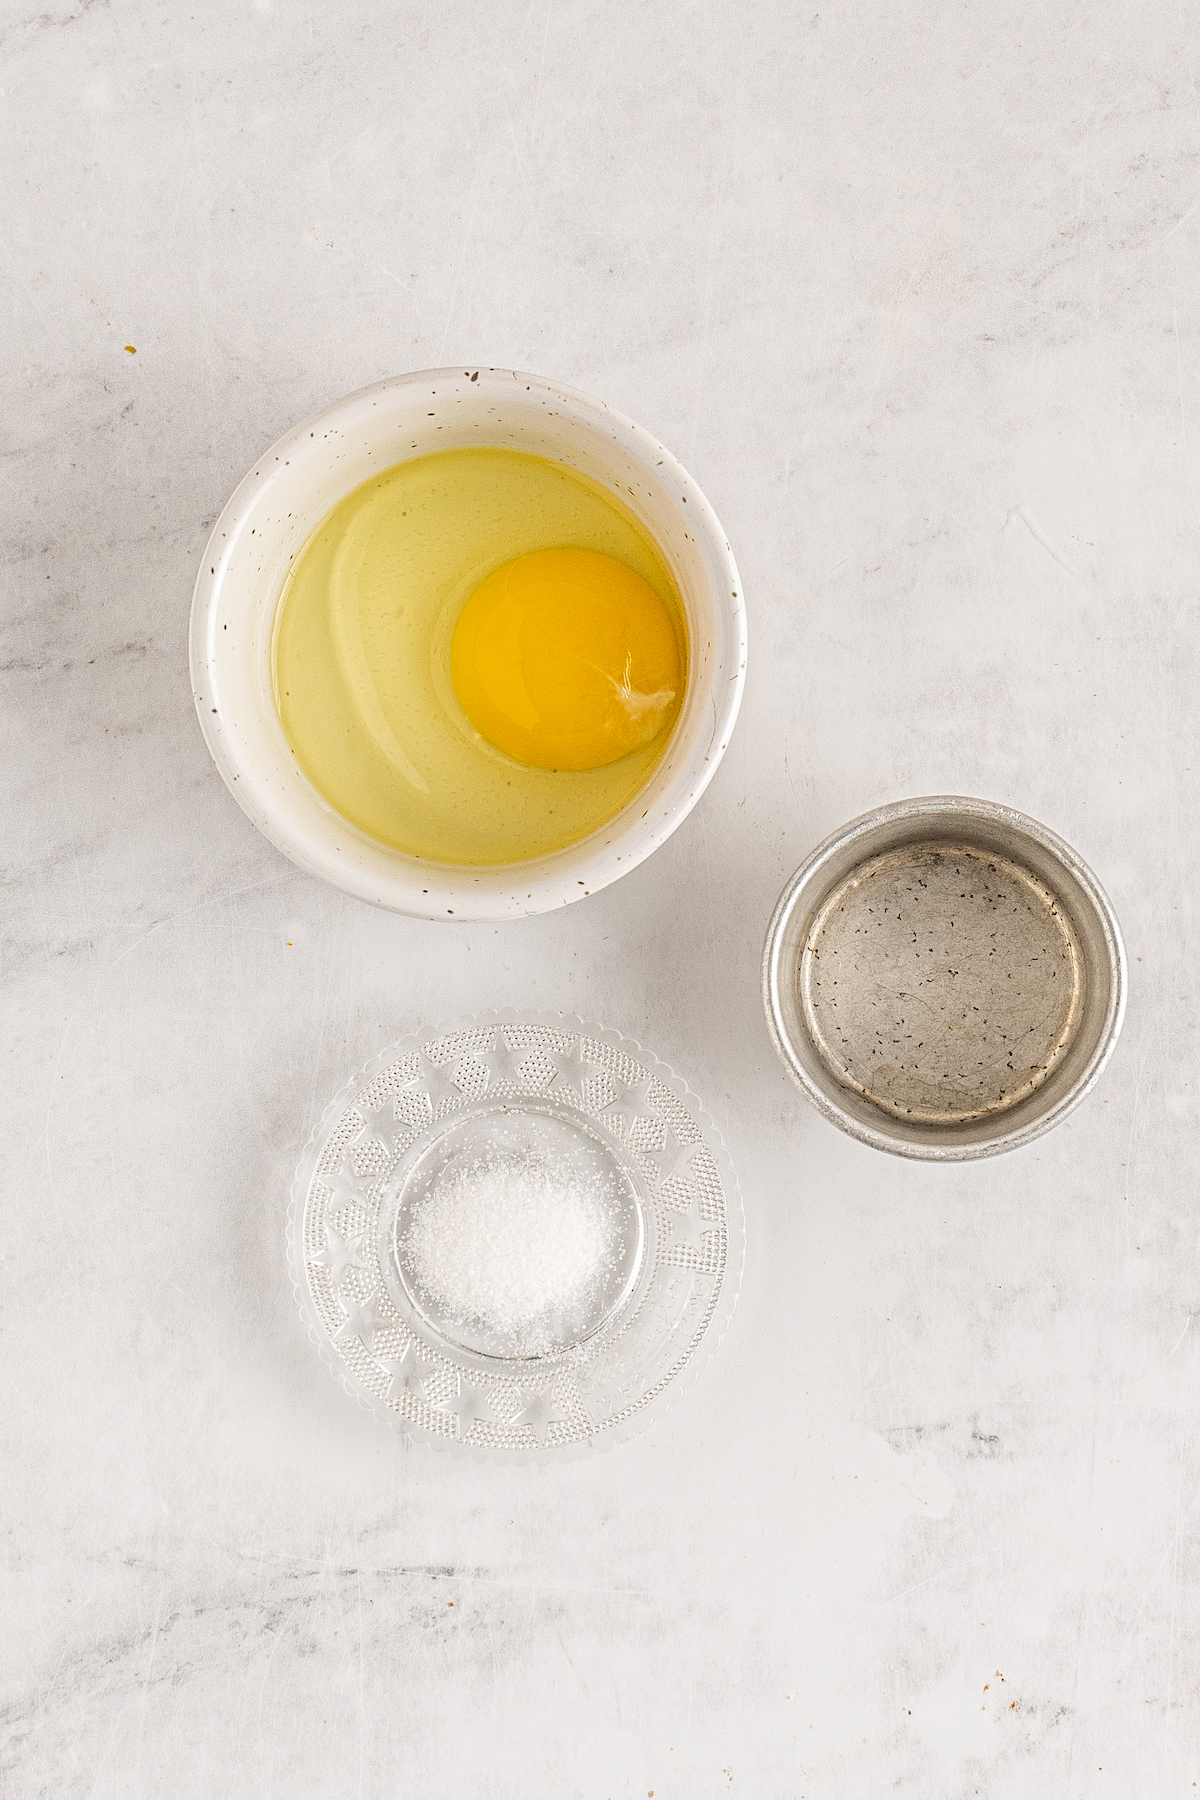 Egg wash ingredients: An egg, water, and salt.